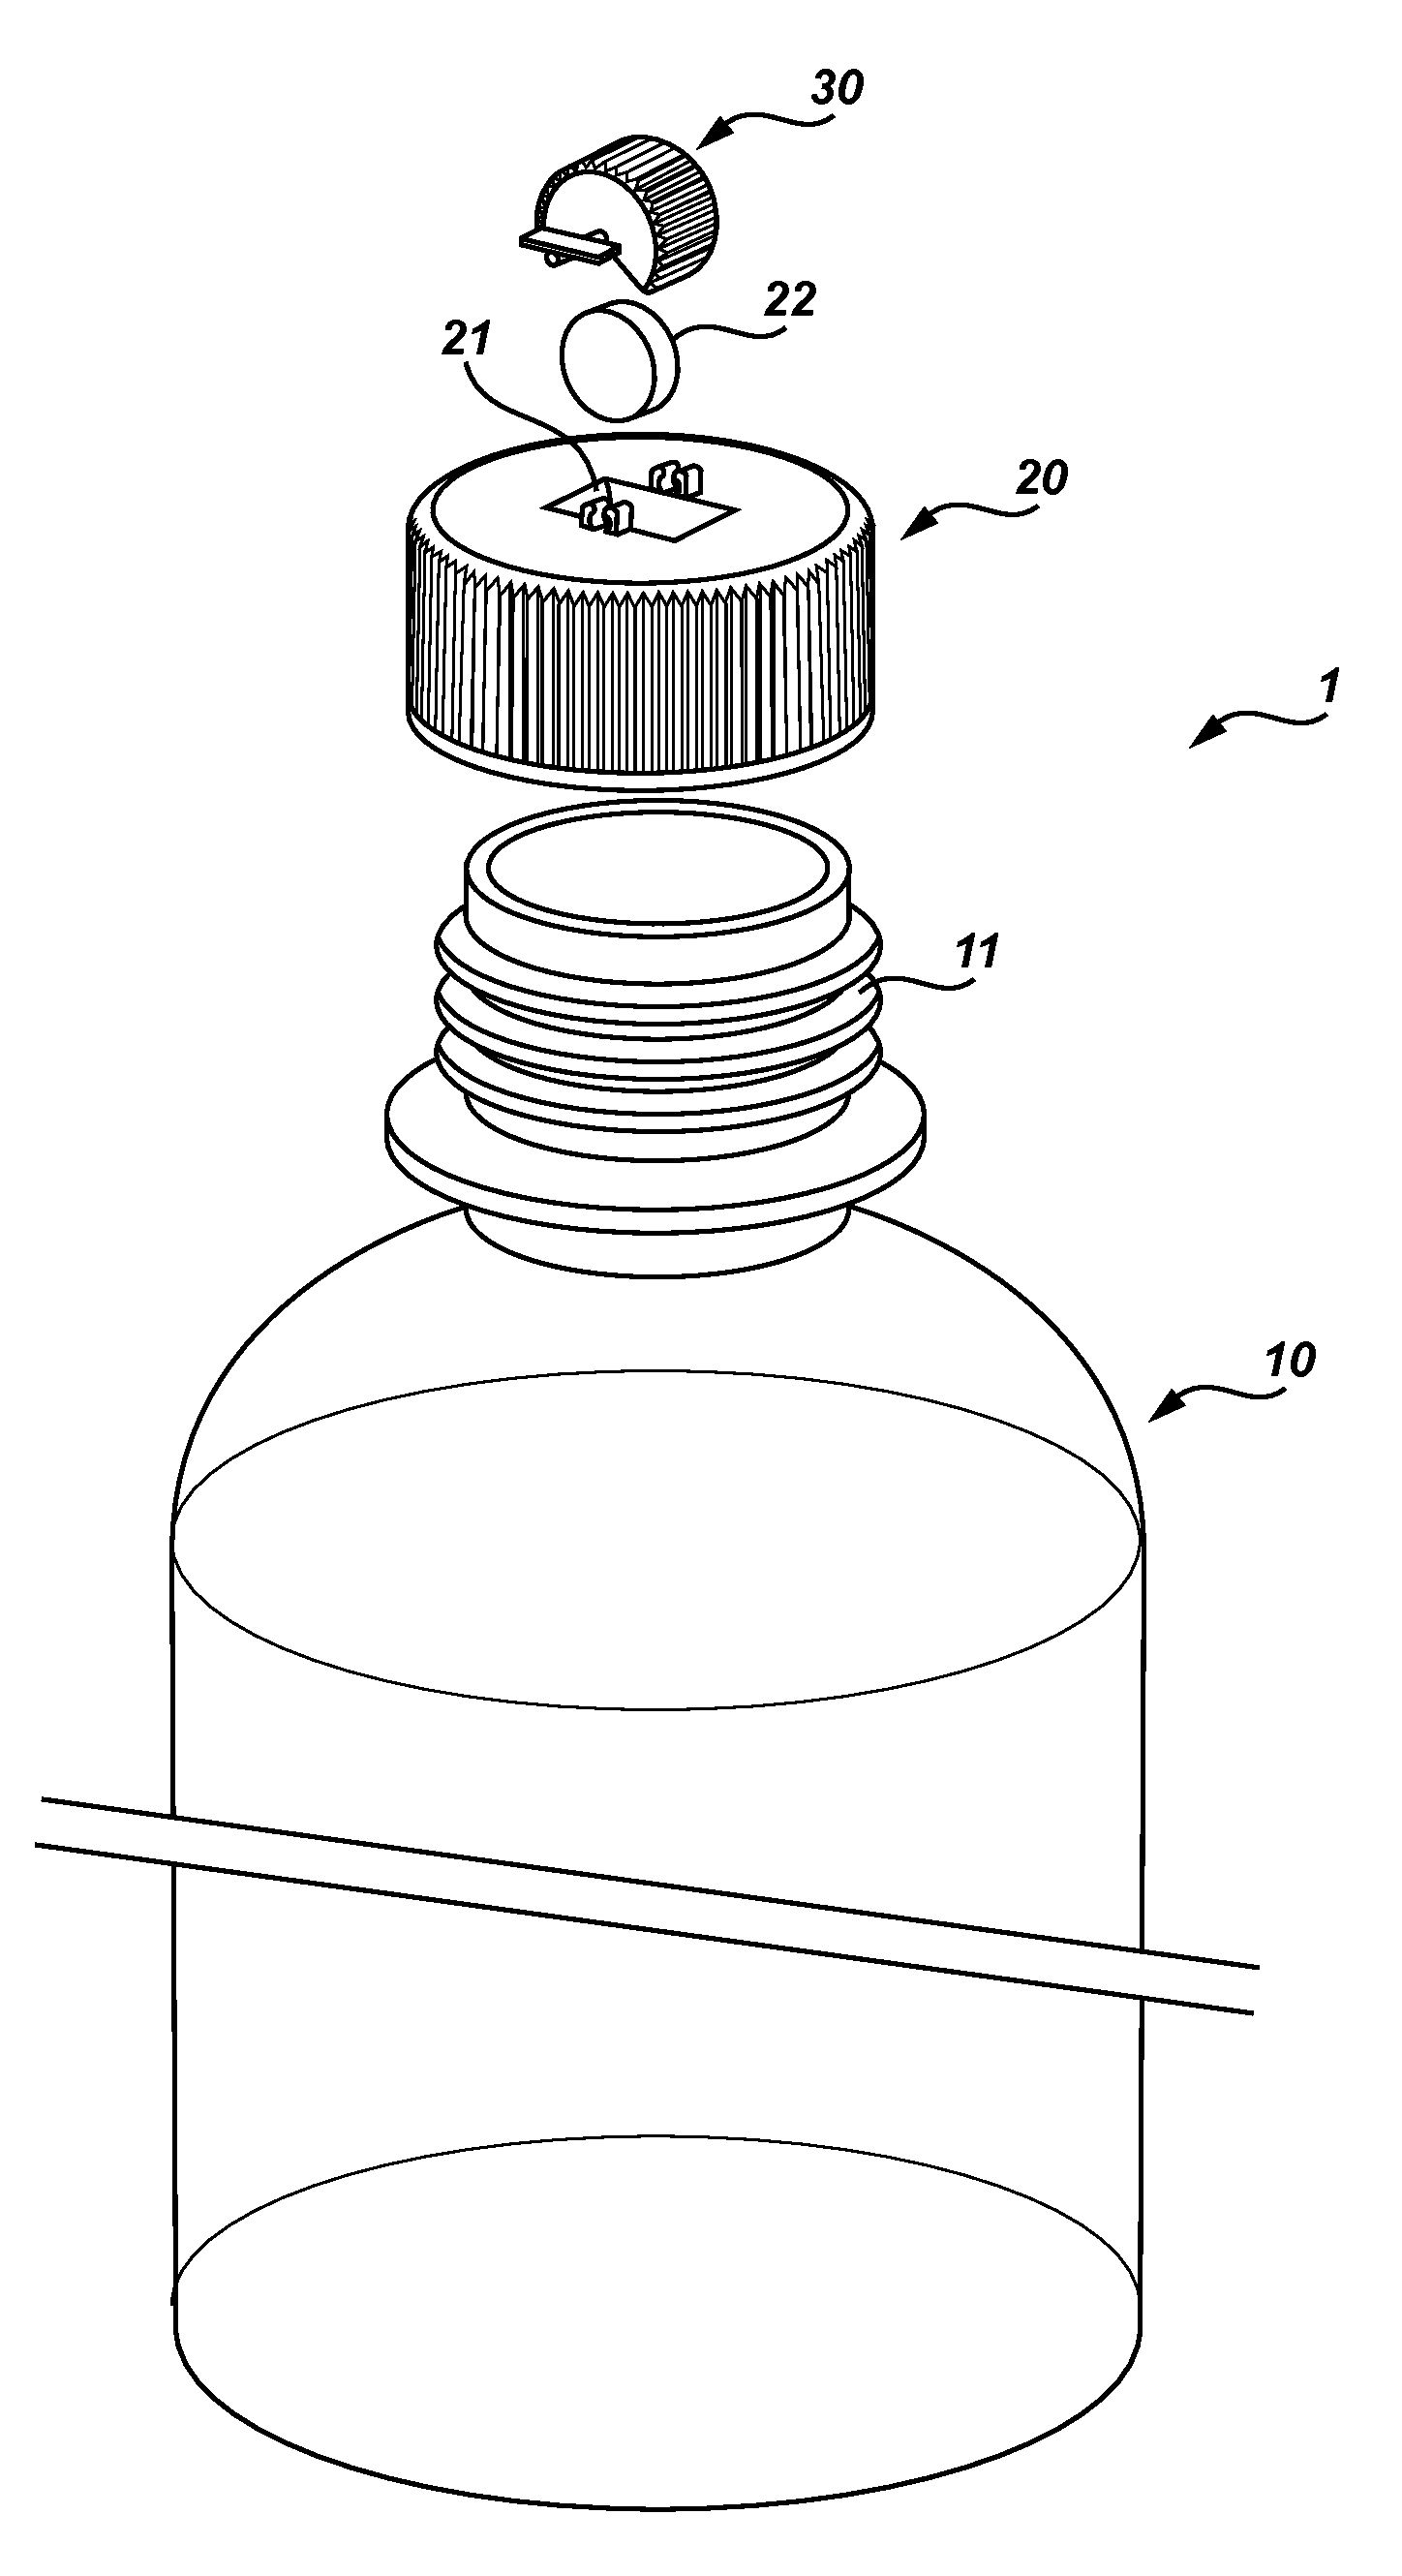 Water bottle with dosage in a dispenser cap